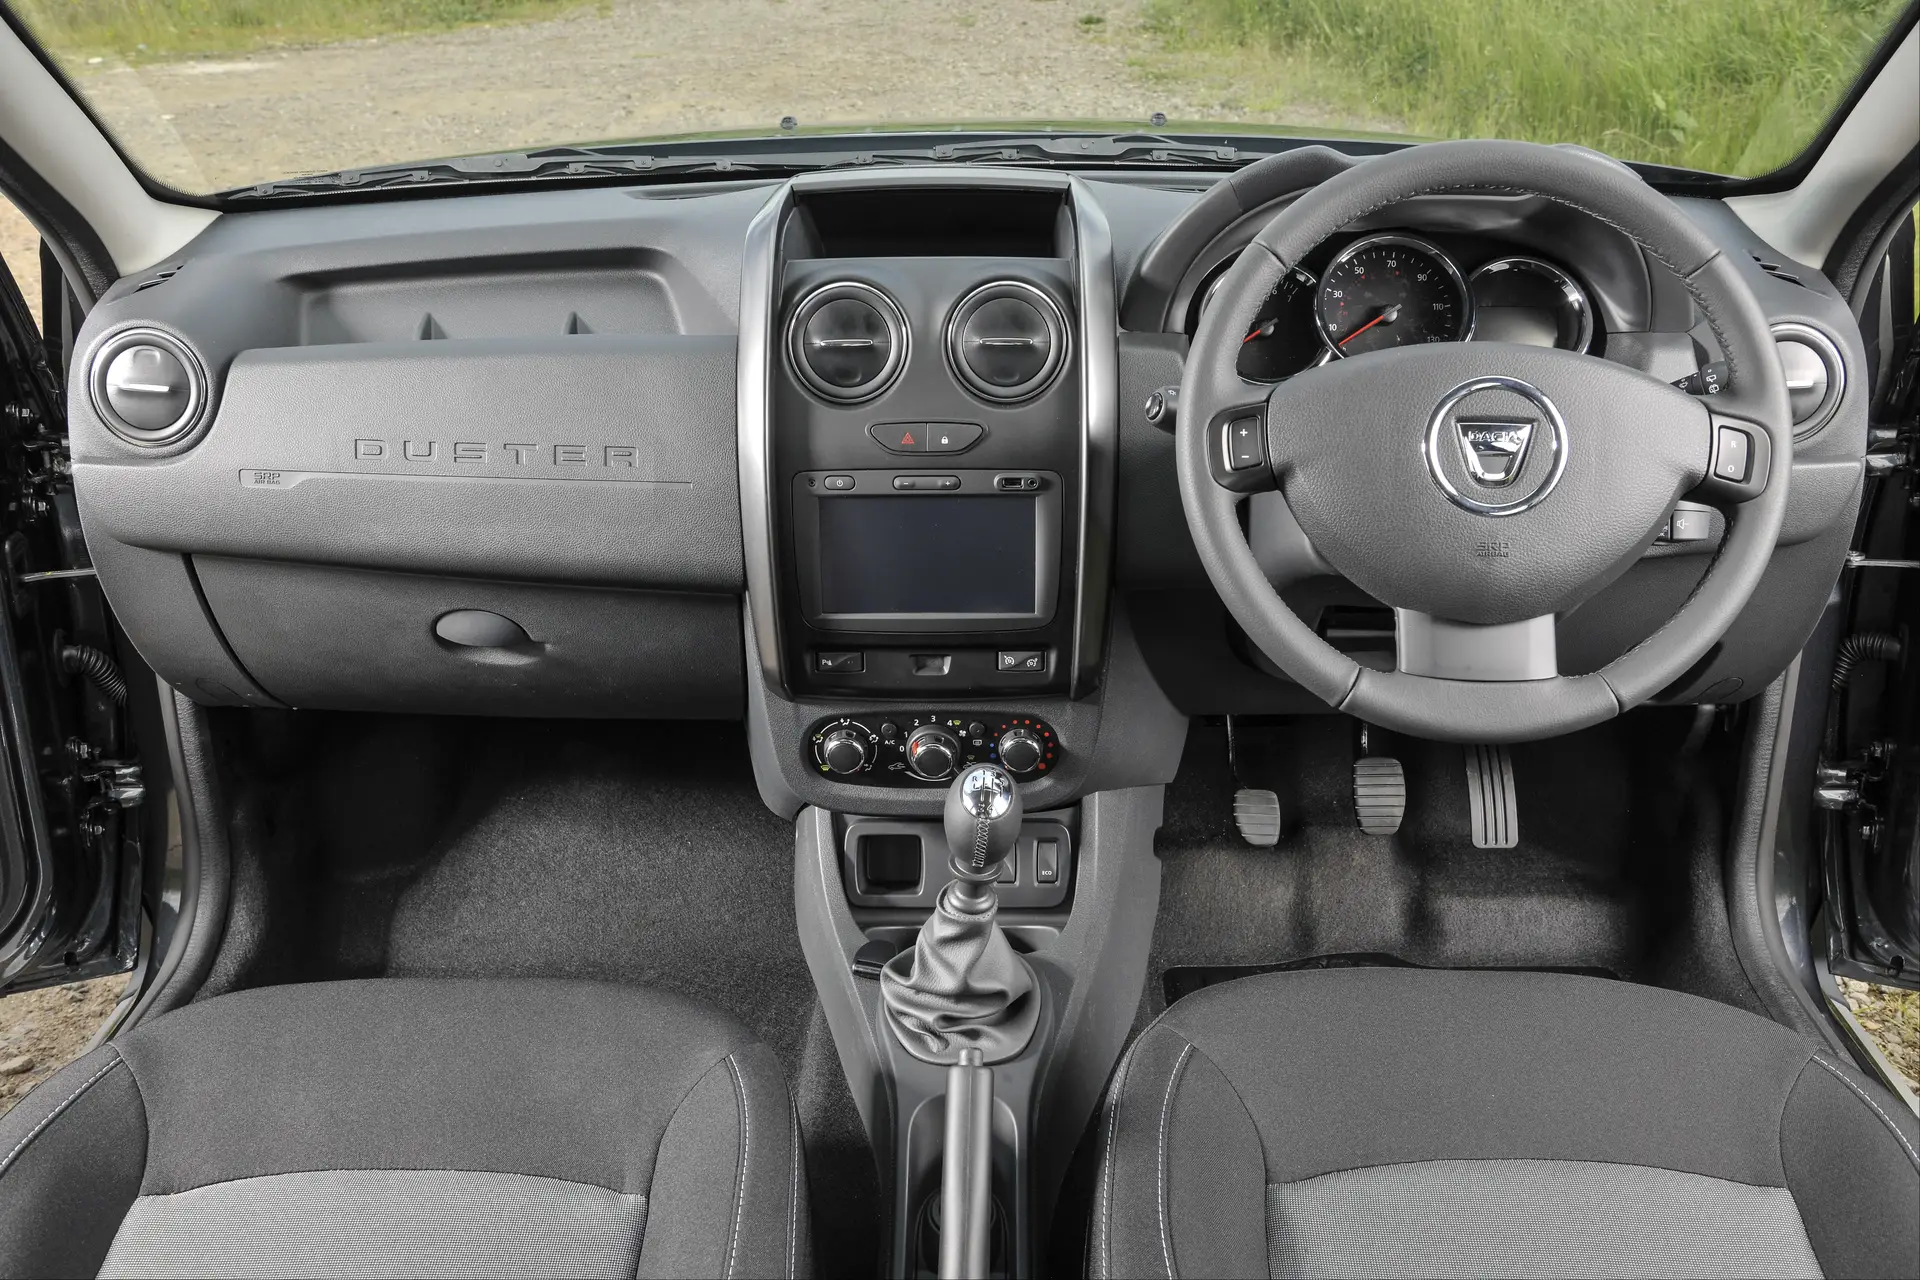 Used Dacia Duster (2012-2018) Review: interior close up photo of the Dacia Duster dashboard